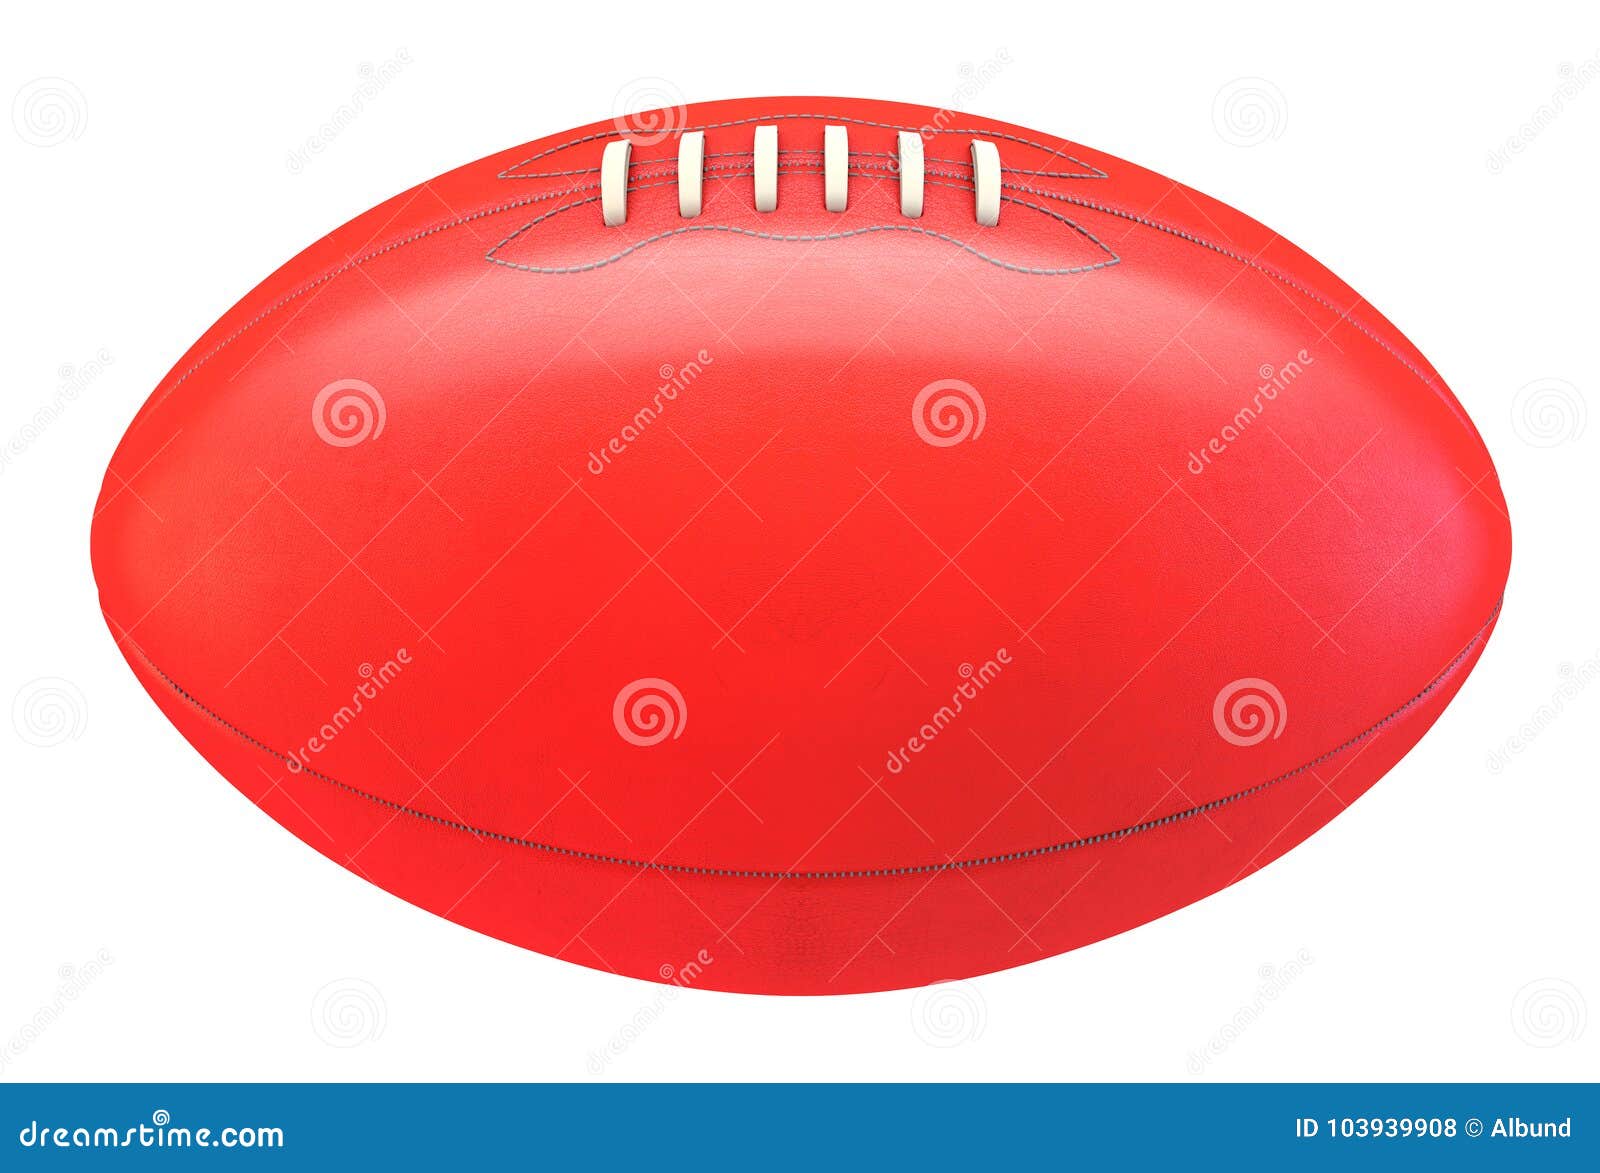 Aussie Rules Ball stock illustration. of close